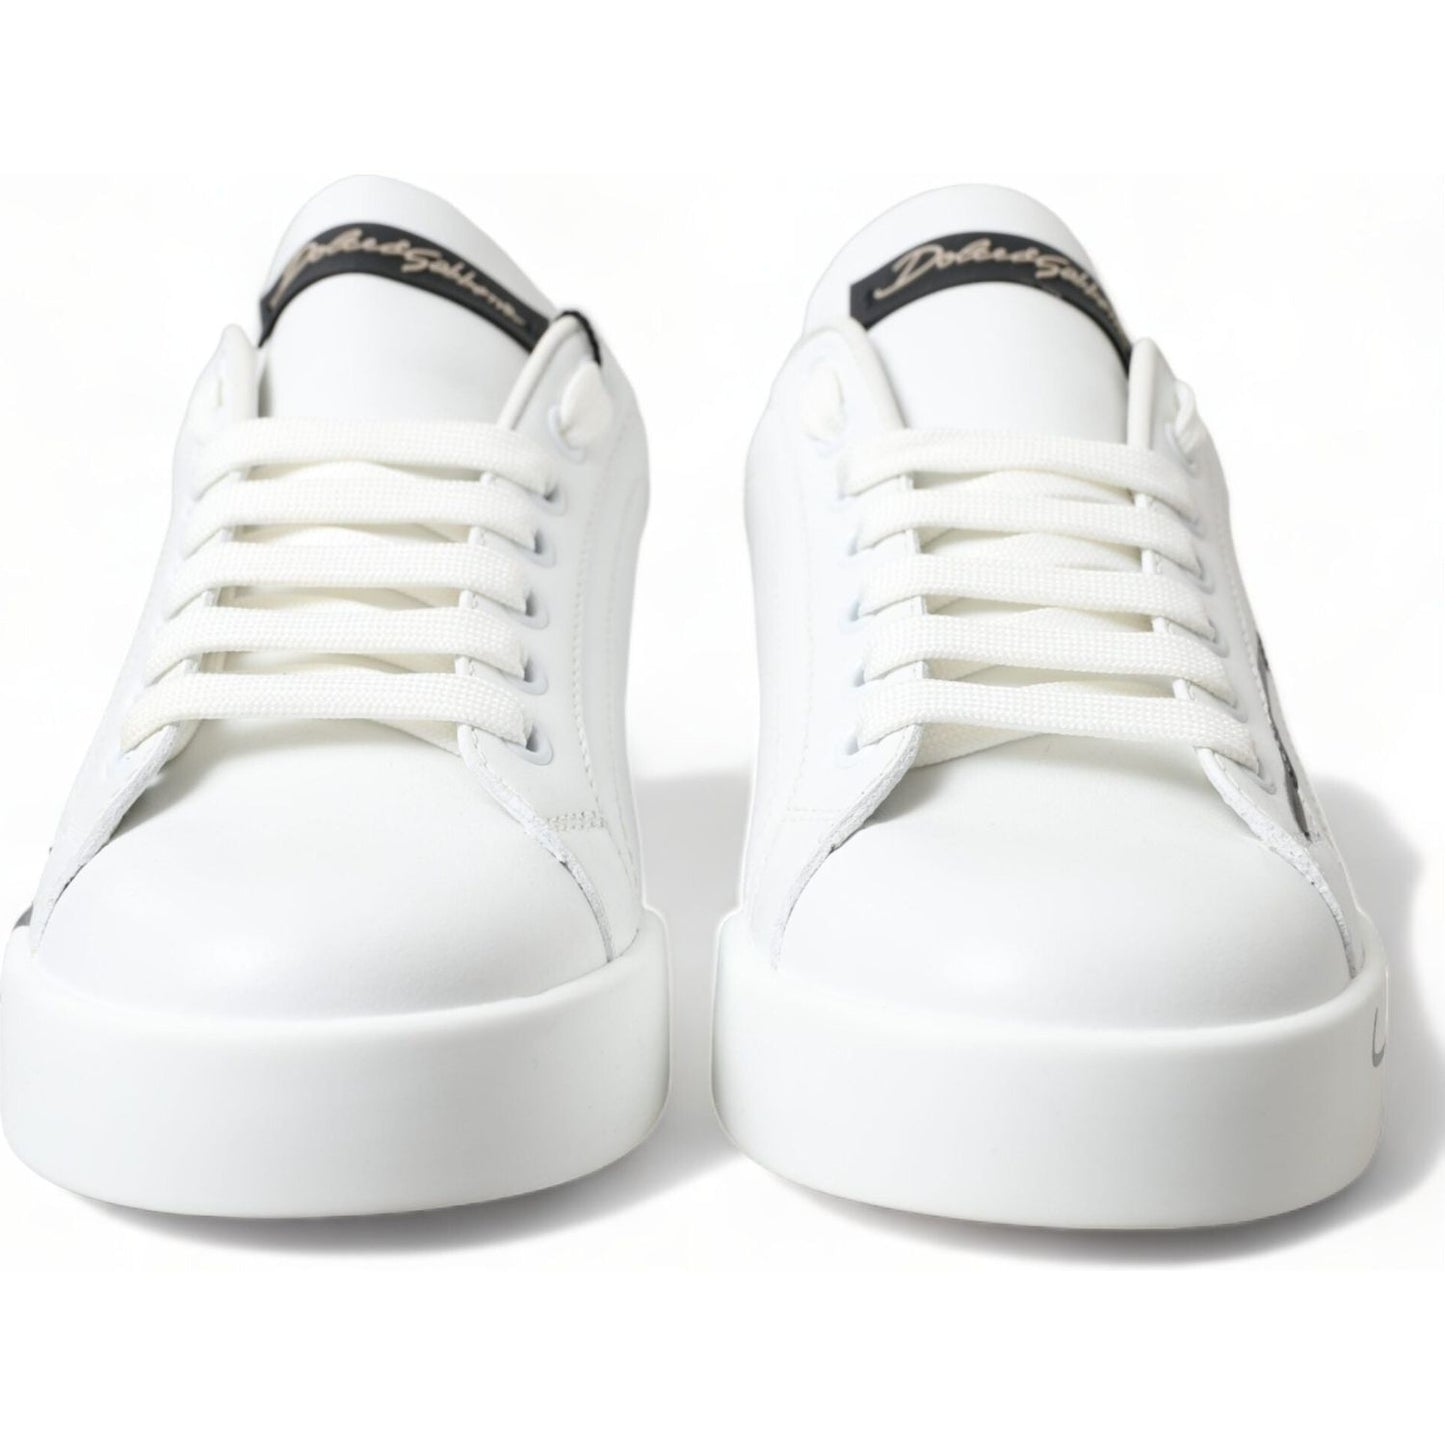 Dolce & Gabbana Elegant White & Gold Leather Sneakers white-gold-lace-up-womens-low-top-sneakers